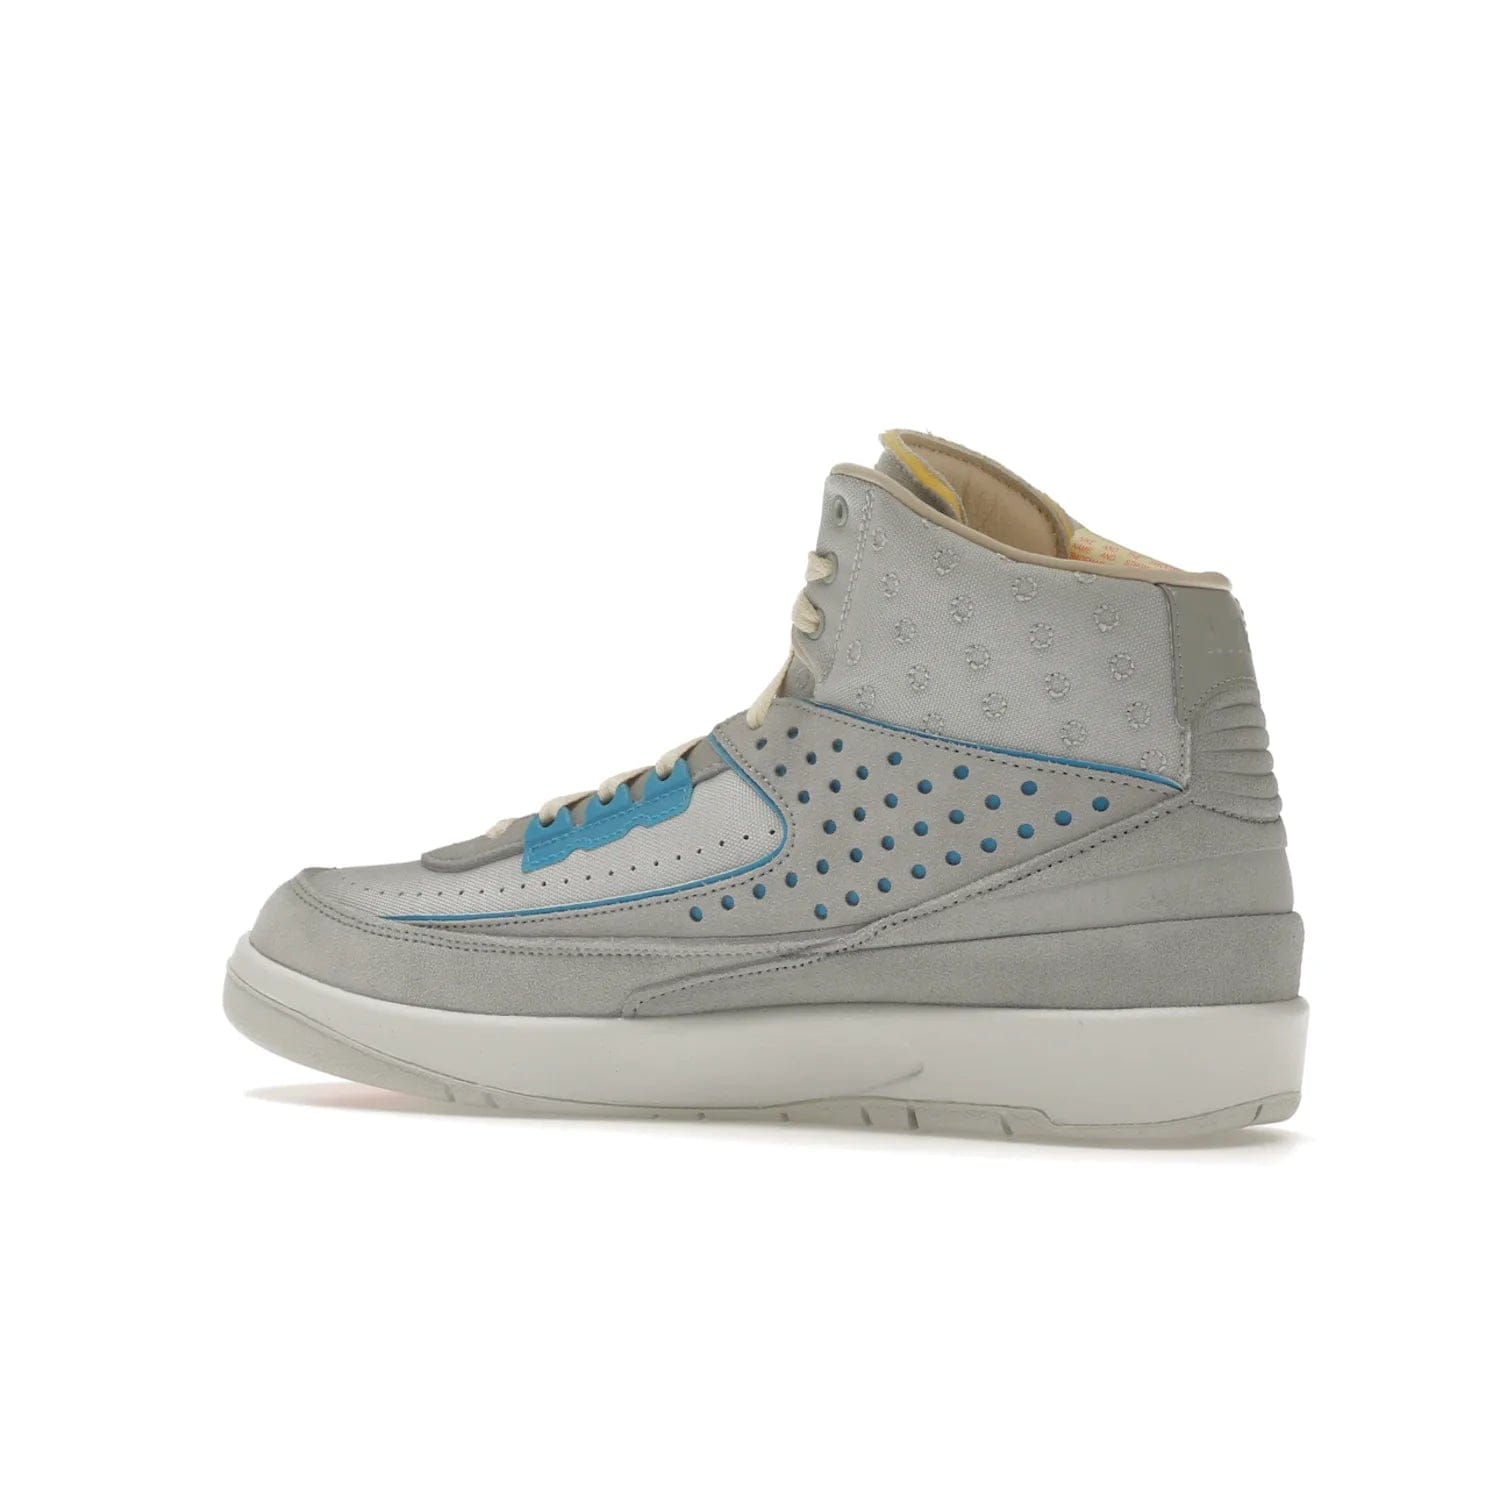 Jordan 2 Retro SP Union Grey Fog - Image 22 - Only at www.BallersClubKickz.com - Introducing the Air Jordan 2 Retro SP Union Grey Fog. This intricate sneaker design features a grey canvas upper with light blue eyelets, eyestay patches, and piping, plus custom external tags. Dropping in April 2022, this exclusive release offers a worn-in look and feel.